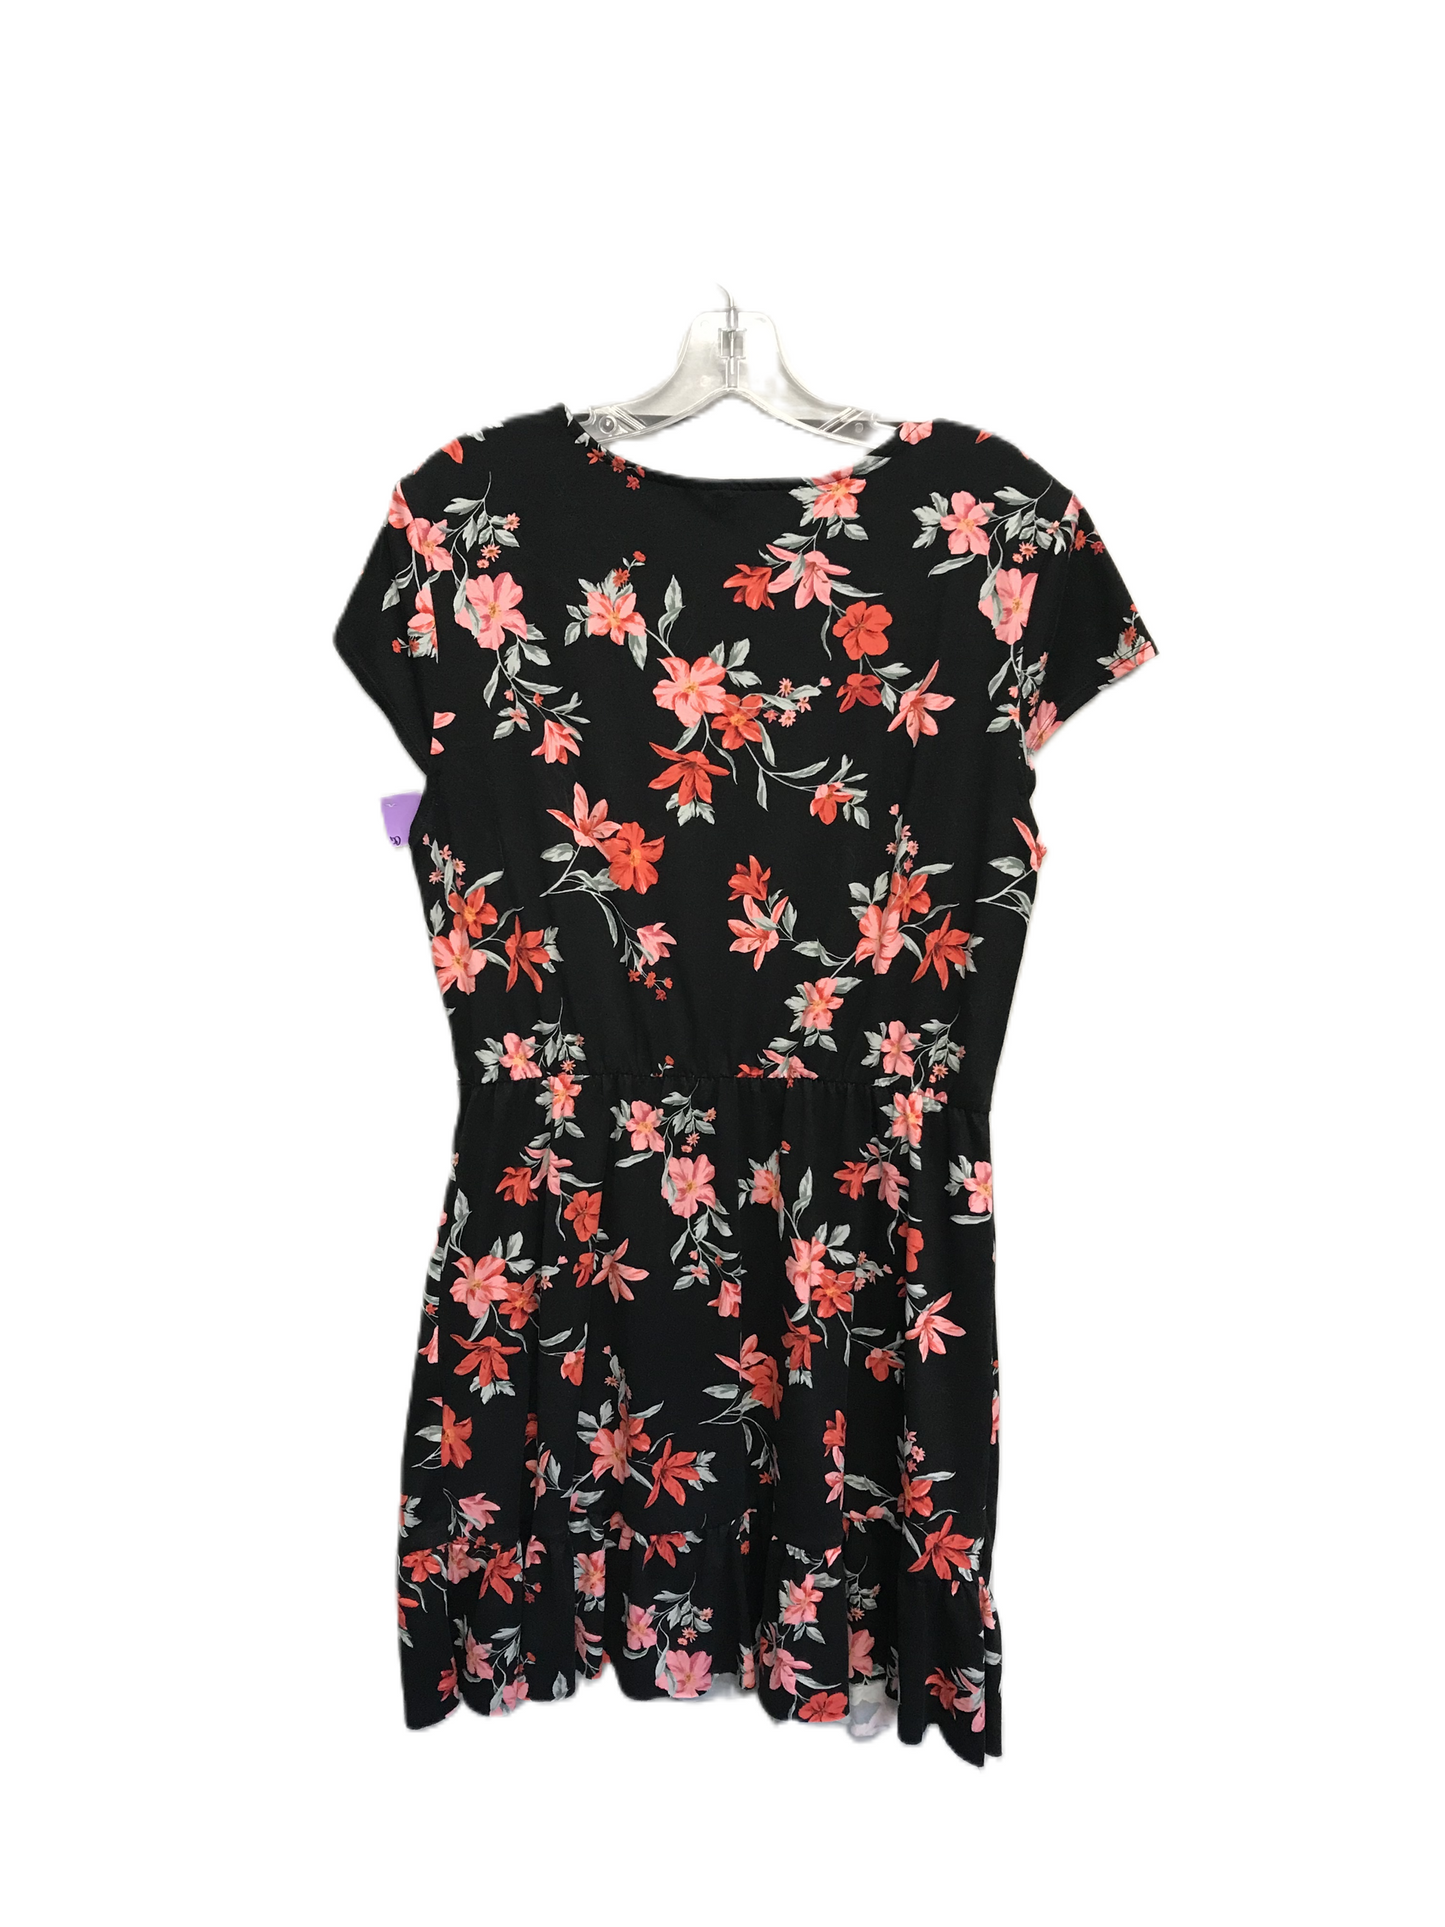 Floral Print Dress Casual Short By Divided, Size: L